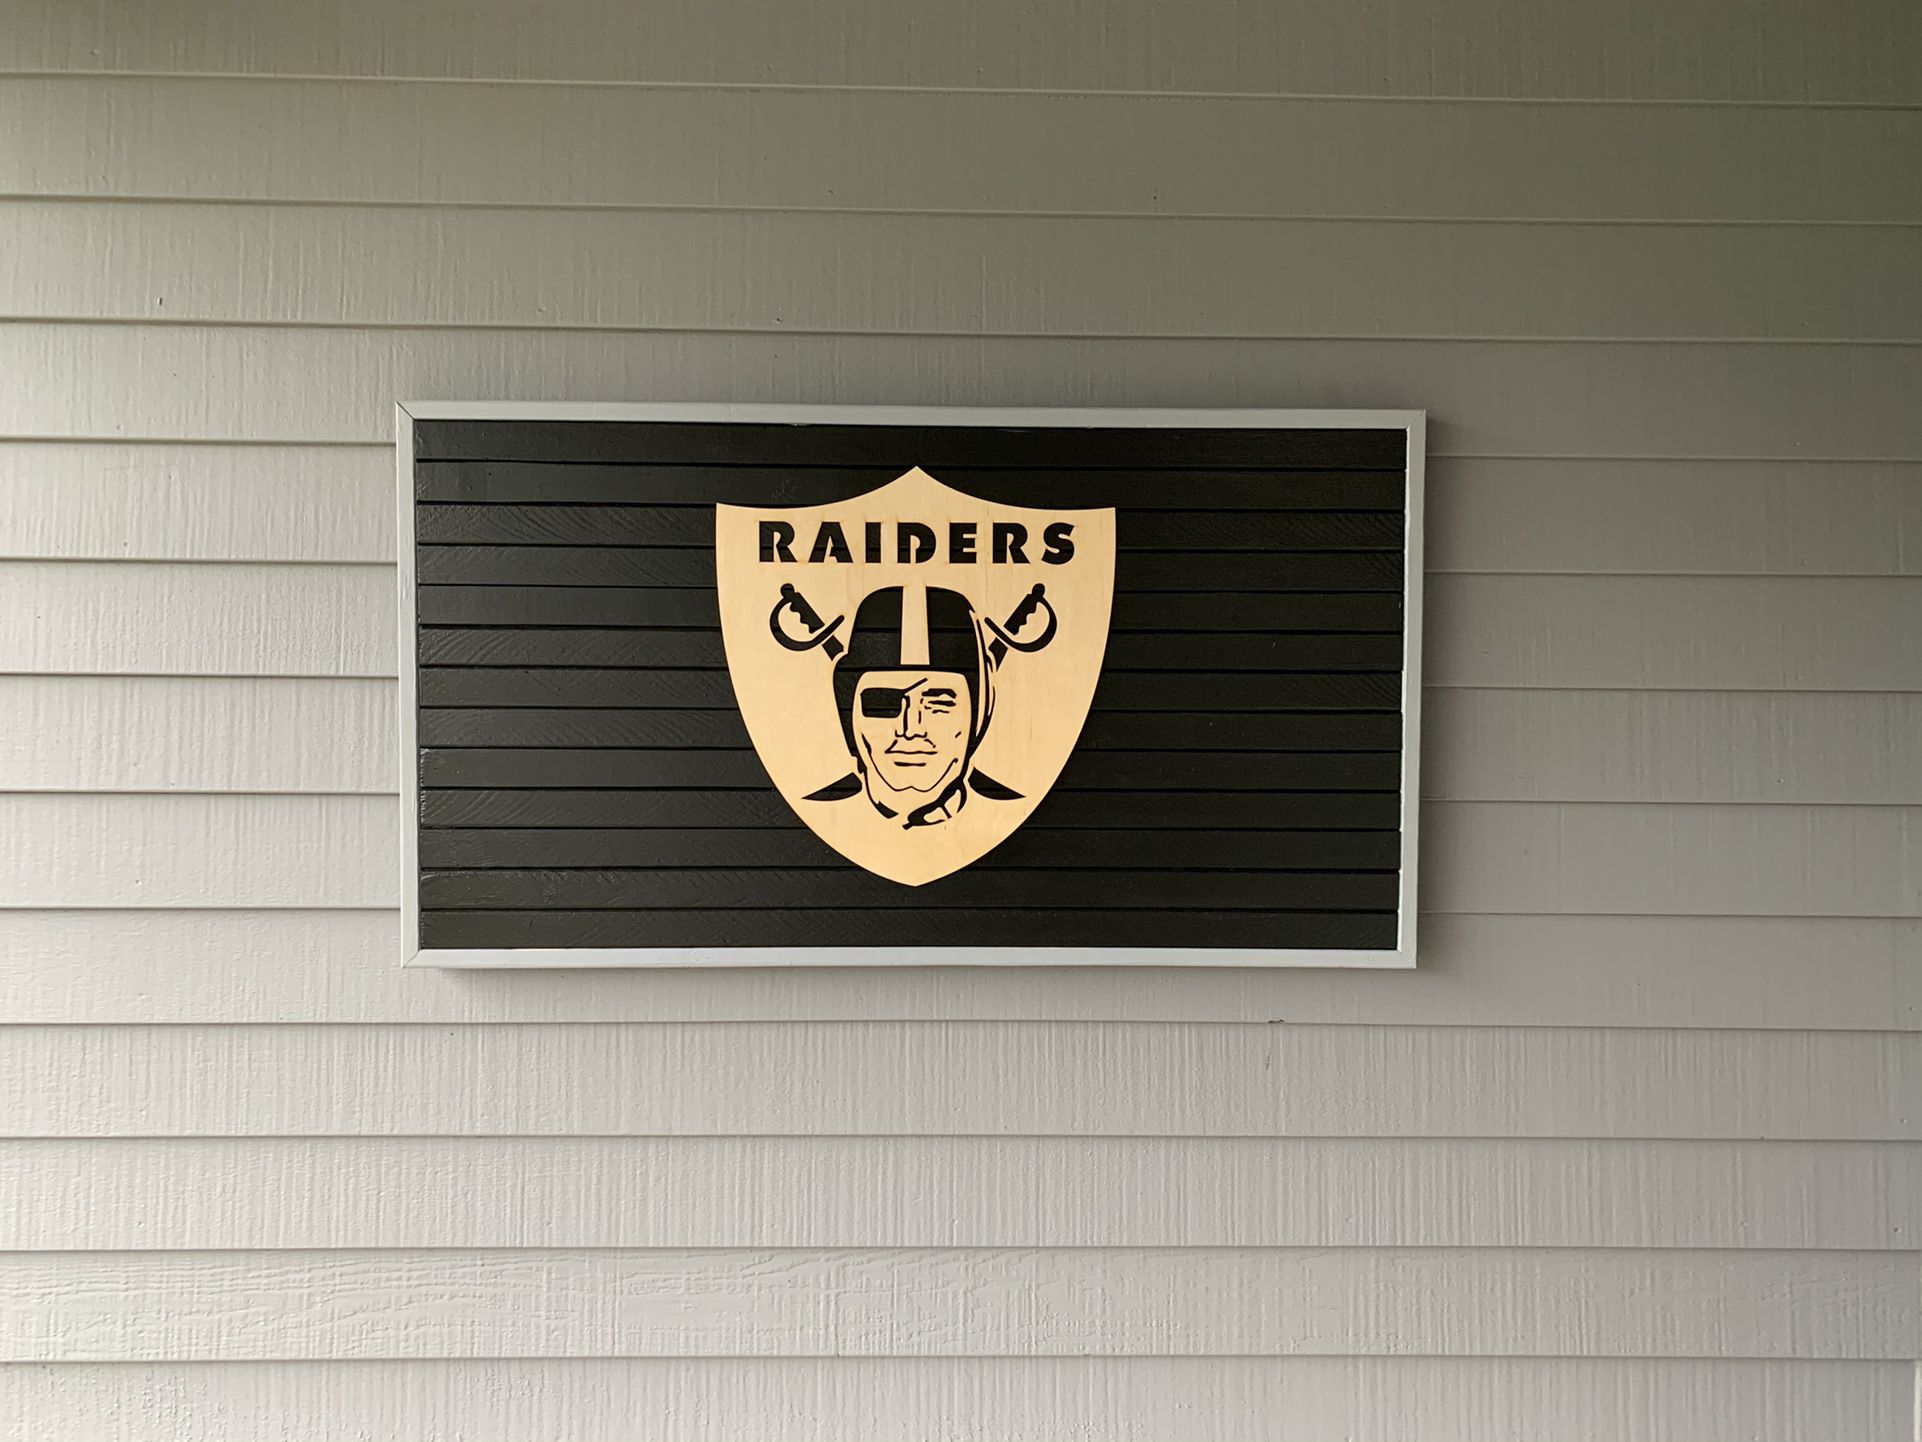 RAIDERS Large Wood Sign / Flag 39”x 21” Handcrafted in Oregon - We Build Handcrafted Wood Flags For Your Favorite Sports Team! - Makes a great gift!